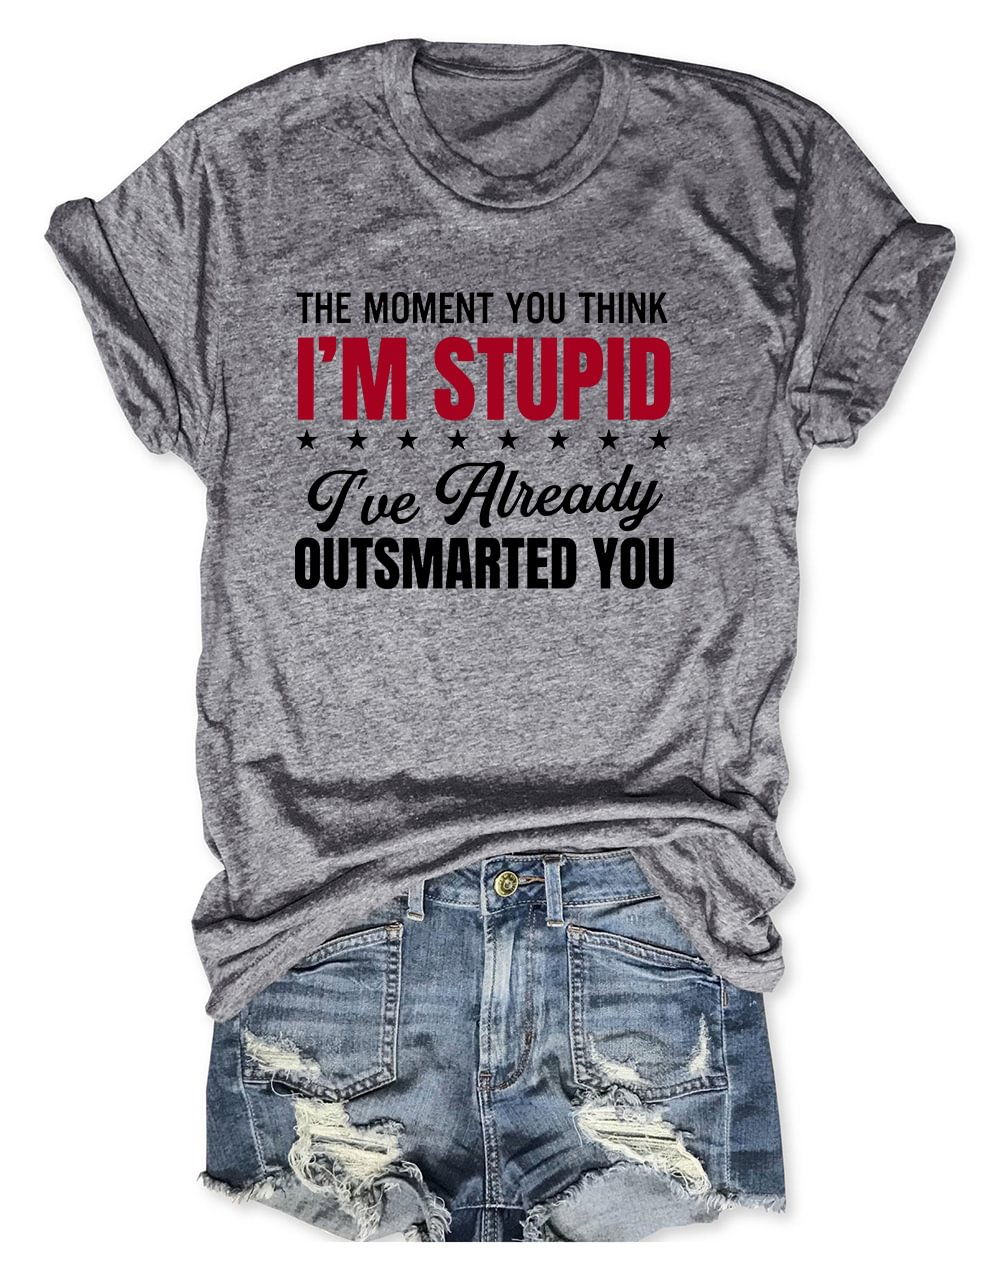 The Moment You Think I'm Stupid T-Shirt